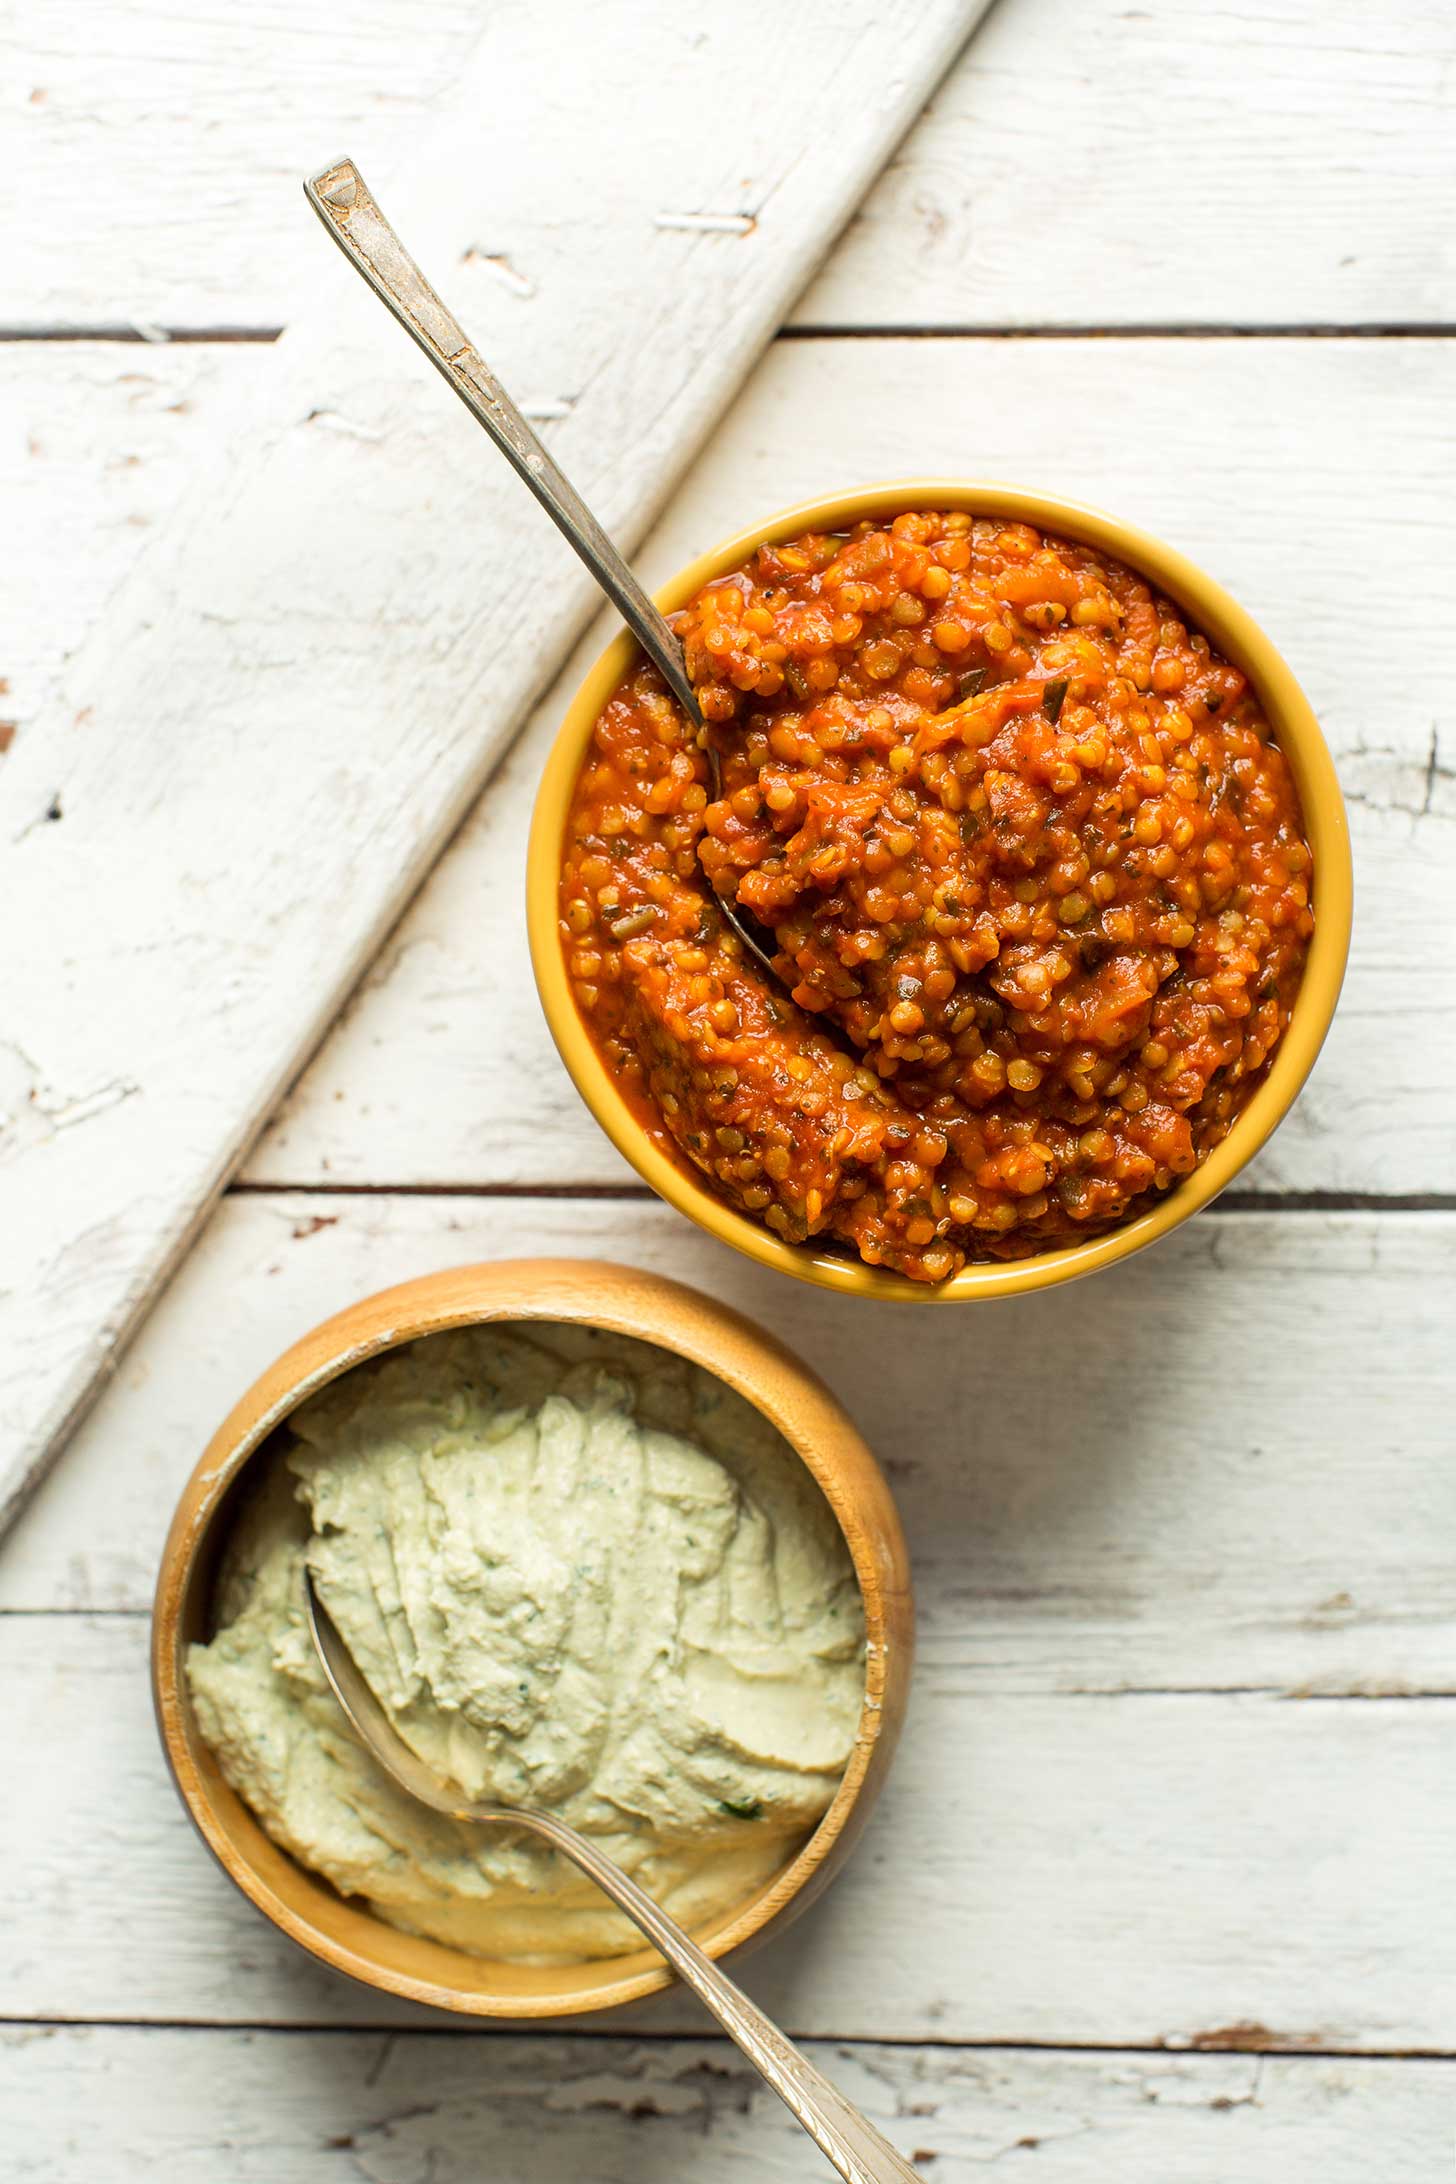 A bowl of lentil red sauce and a bowl of vegan cheese for making homemade protein-packed plant-based lasagna